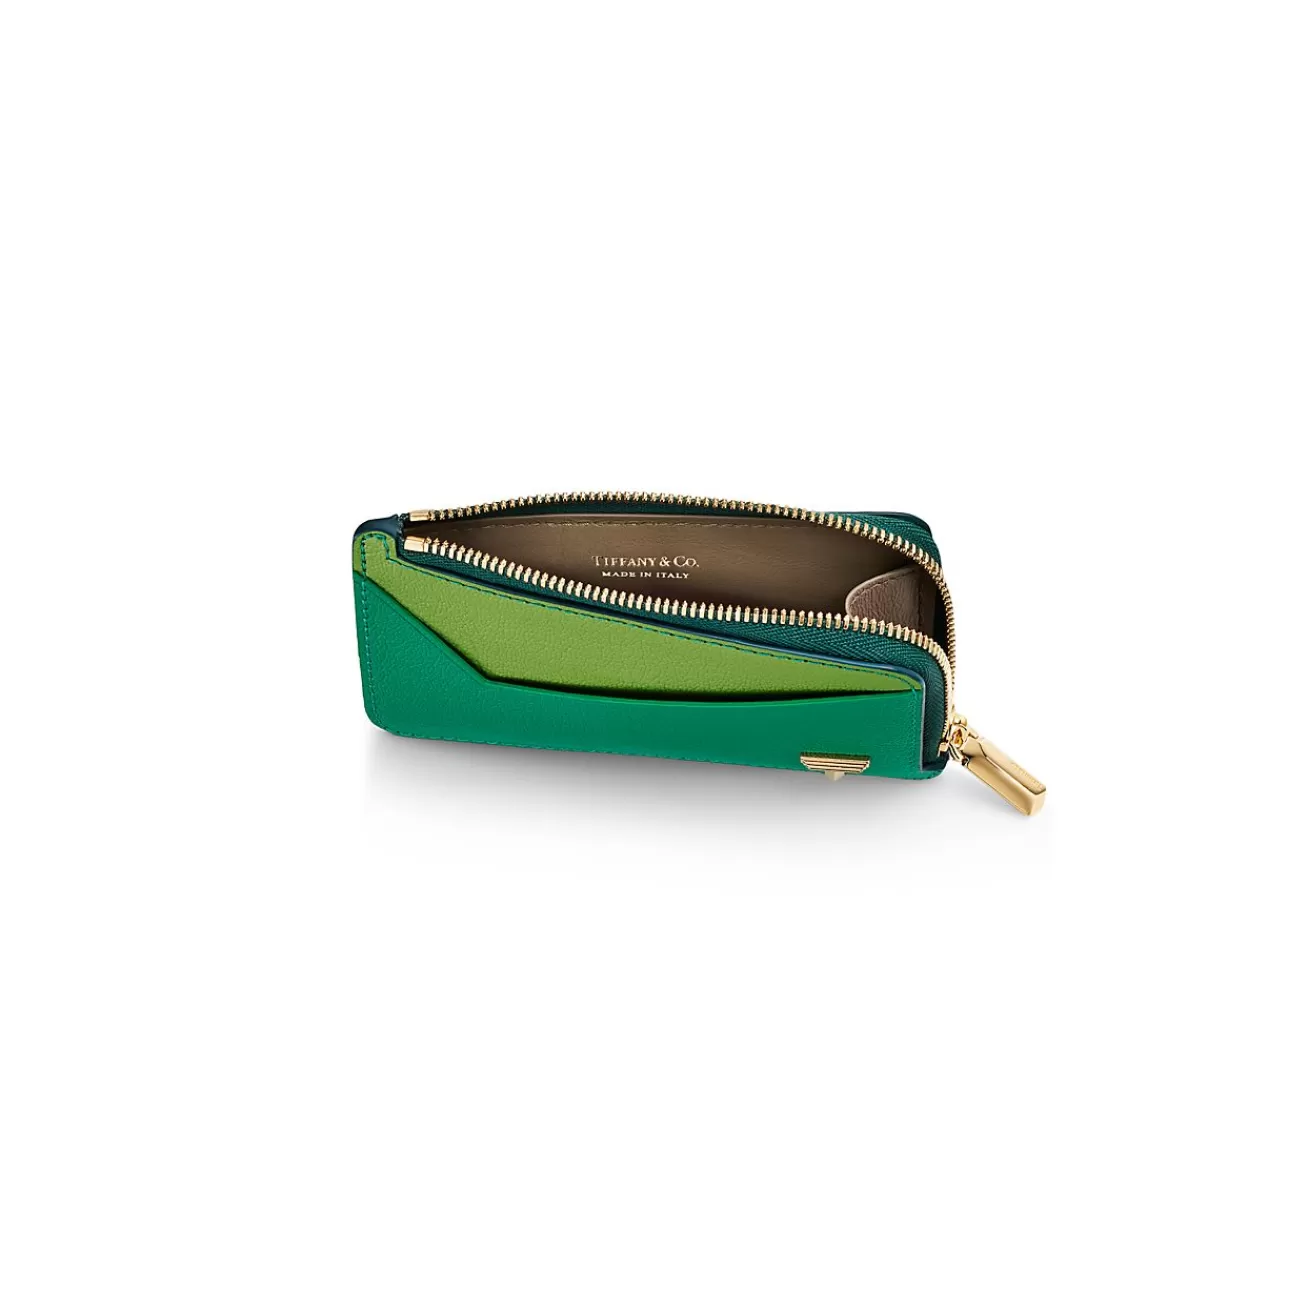 Tiffany & Co. Tiffany T Zip Card Case in Emerald Green Colorblock Leather | ^Women Small Leather Goods | Women's Accessories